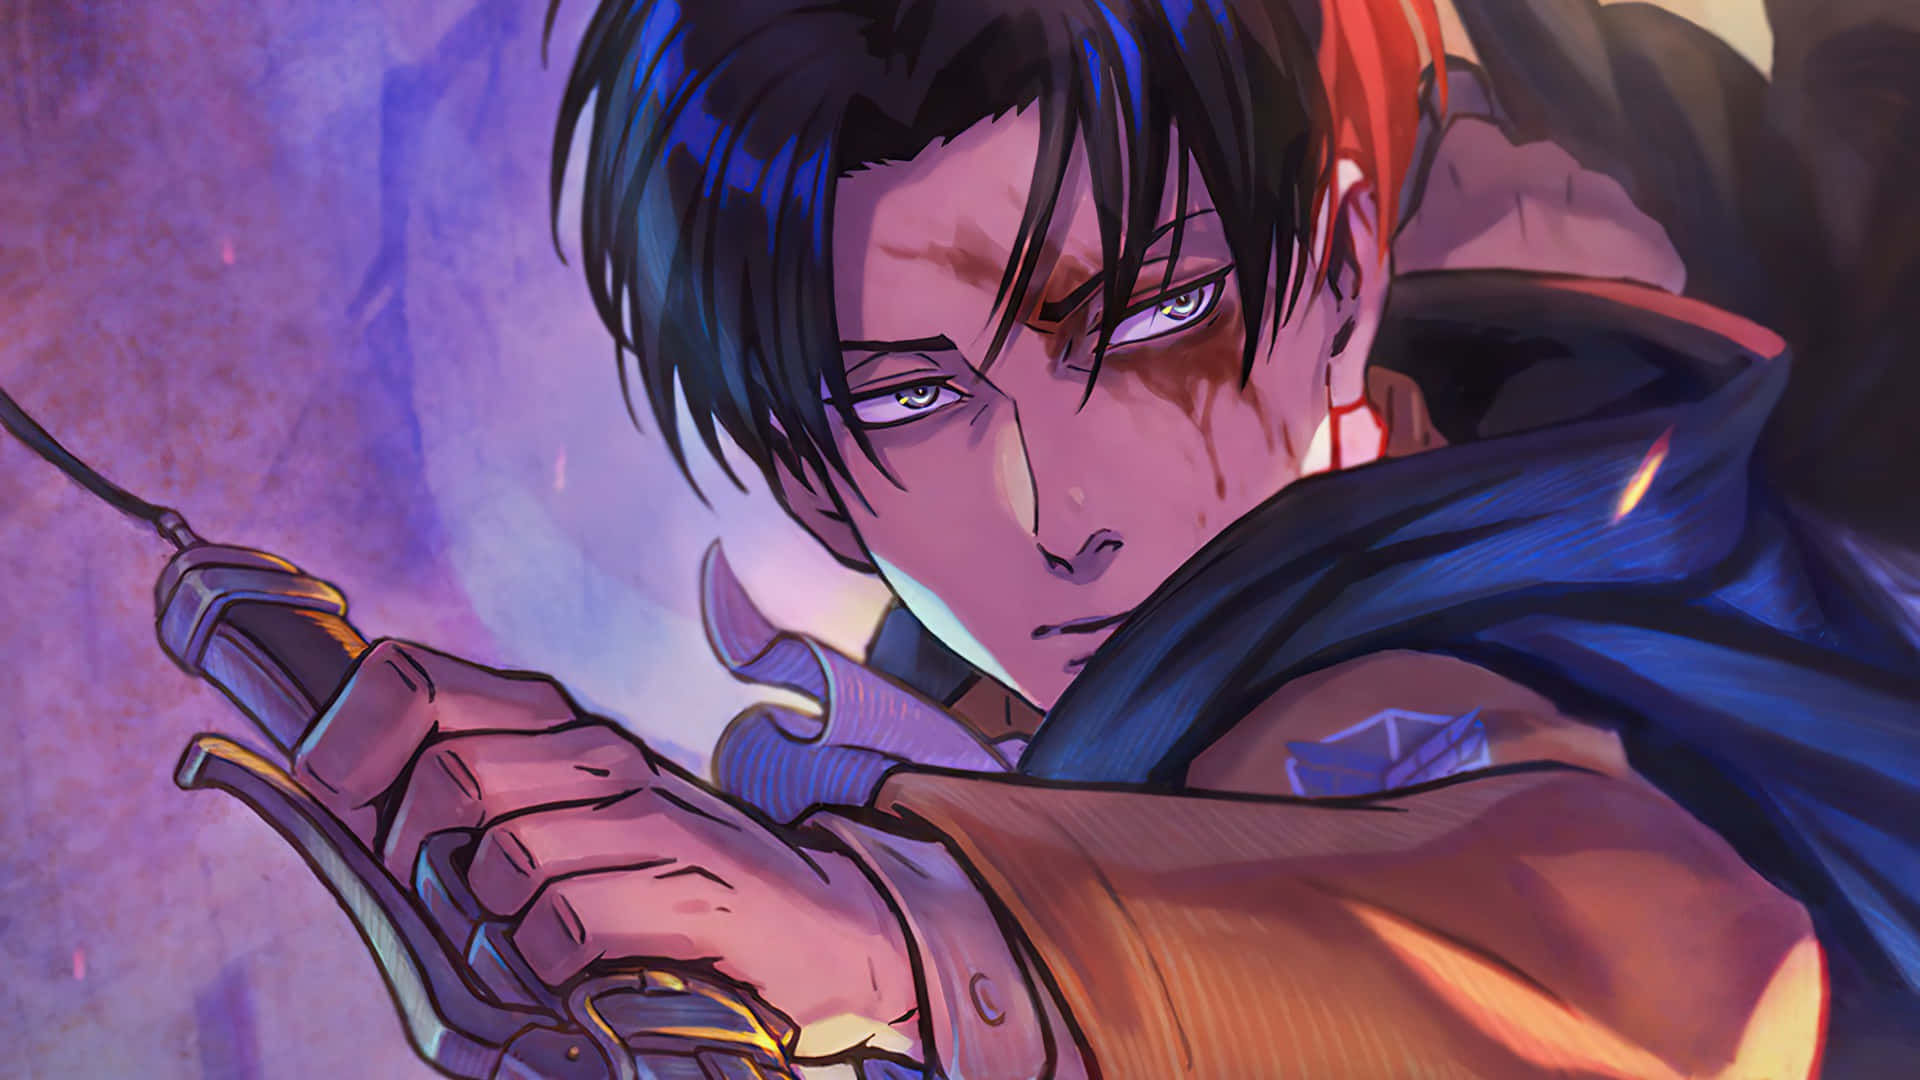 Artistic Levi PFP With Blood Wallpaper